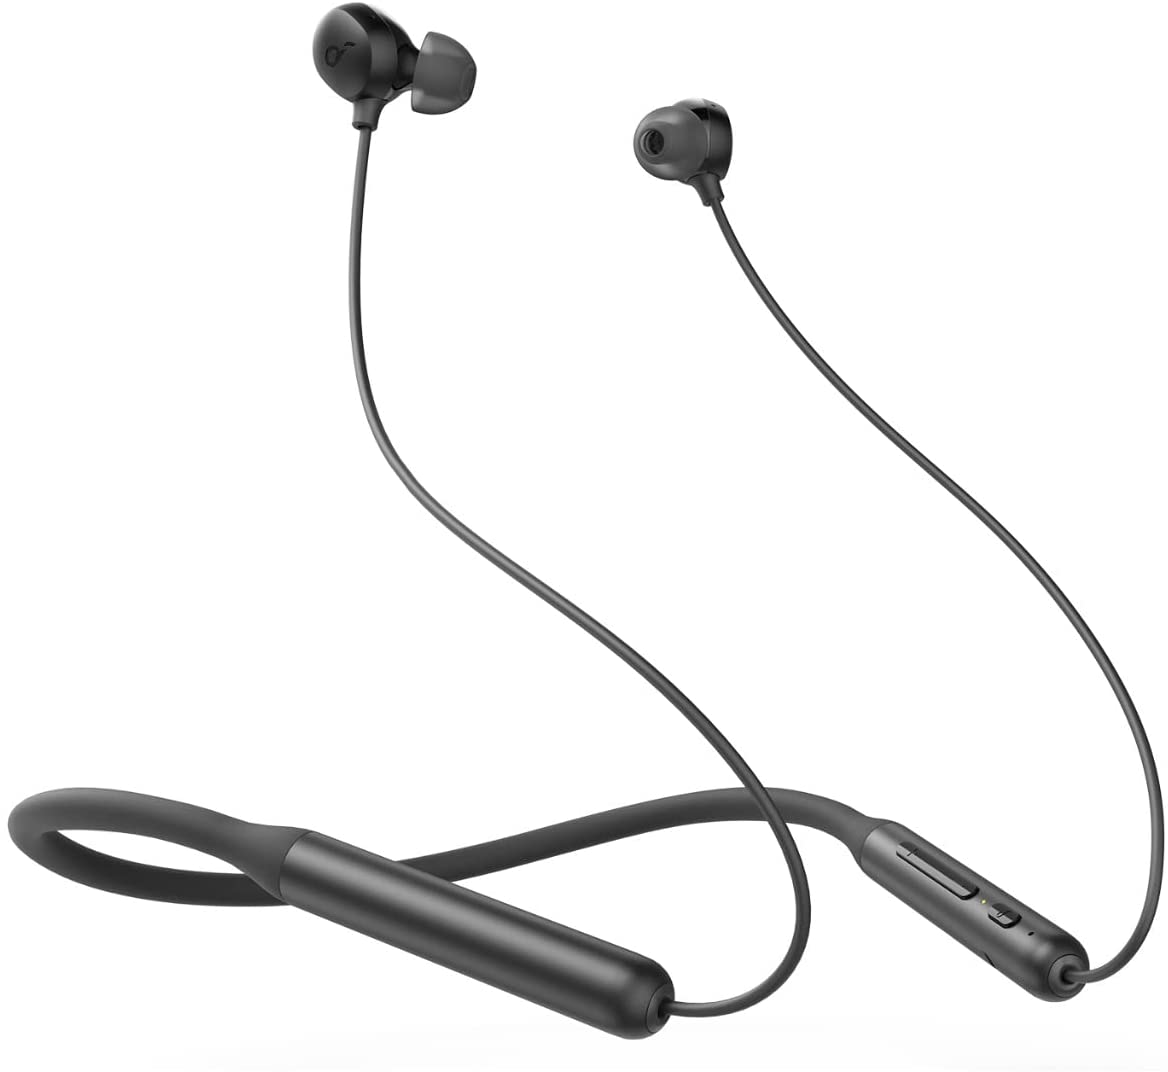 Anker Life U2i Wireless Neckband In-Ear Earphones with Built-in Microphone, Black - A3213H11